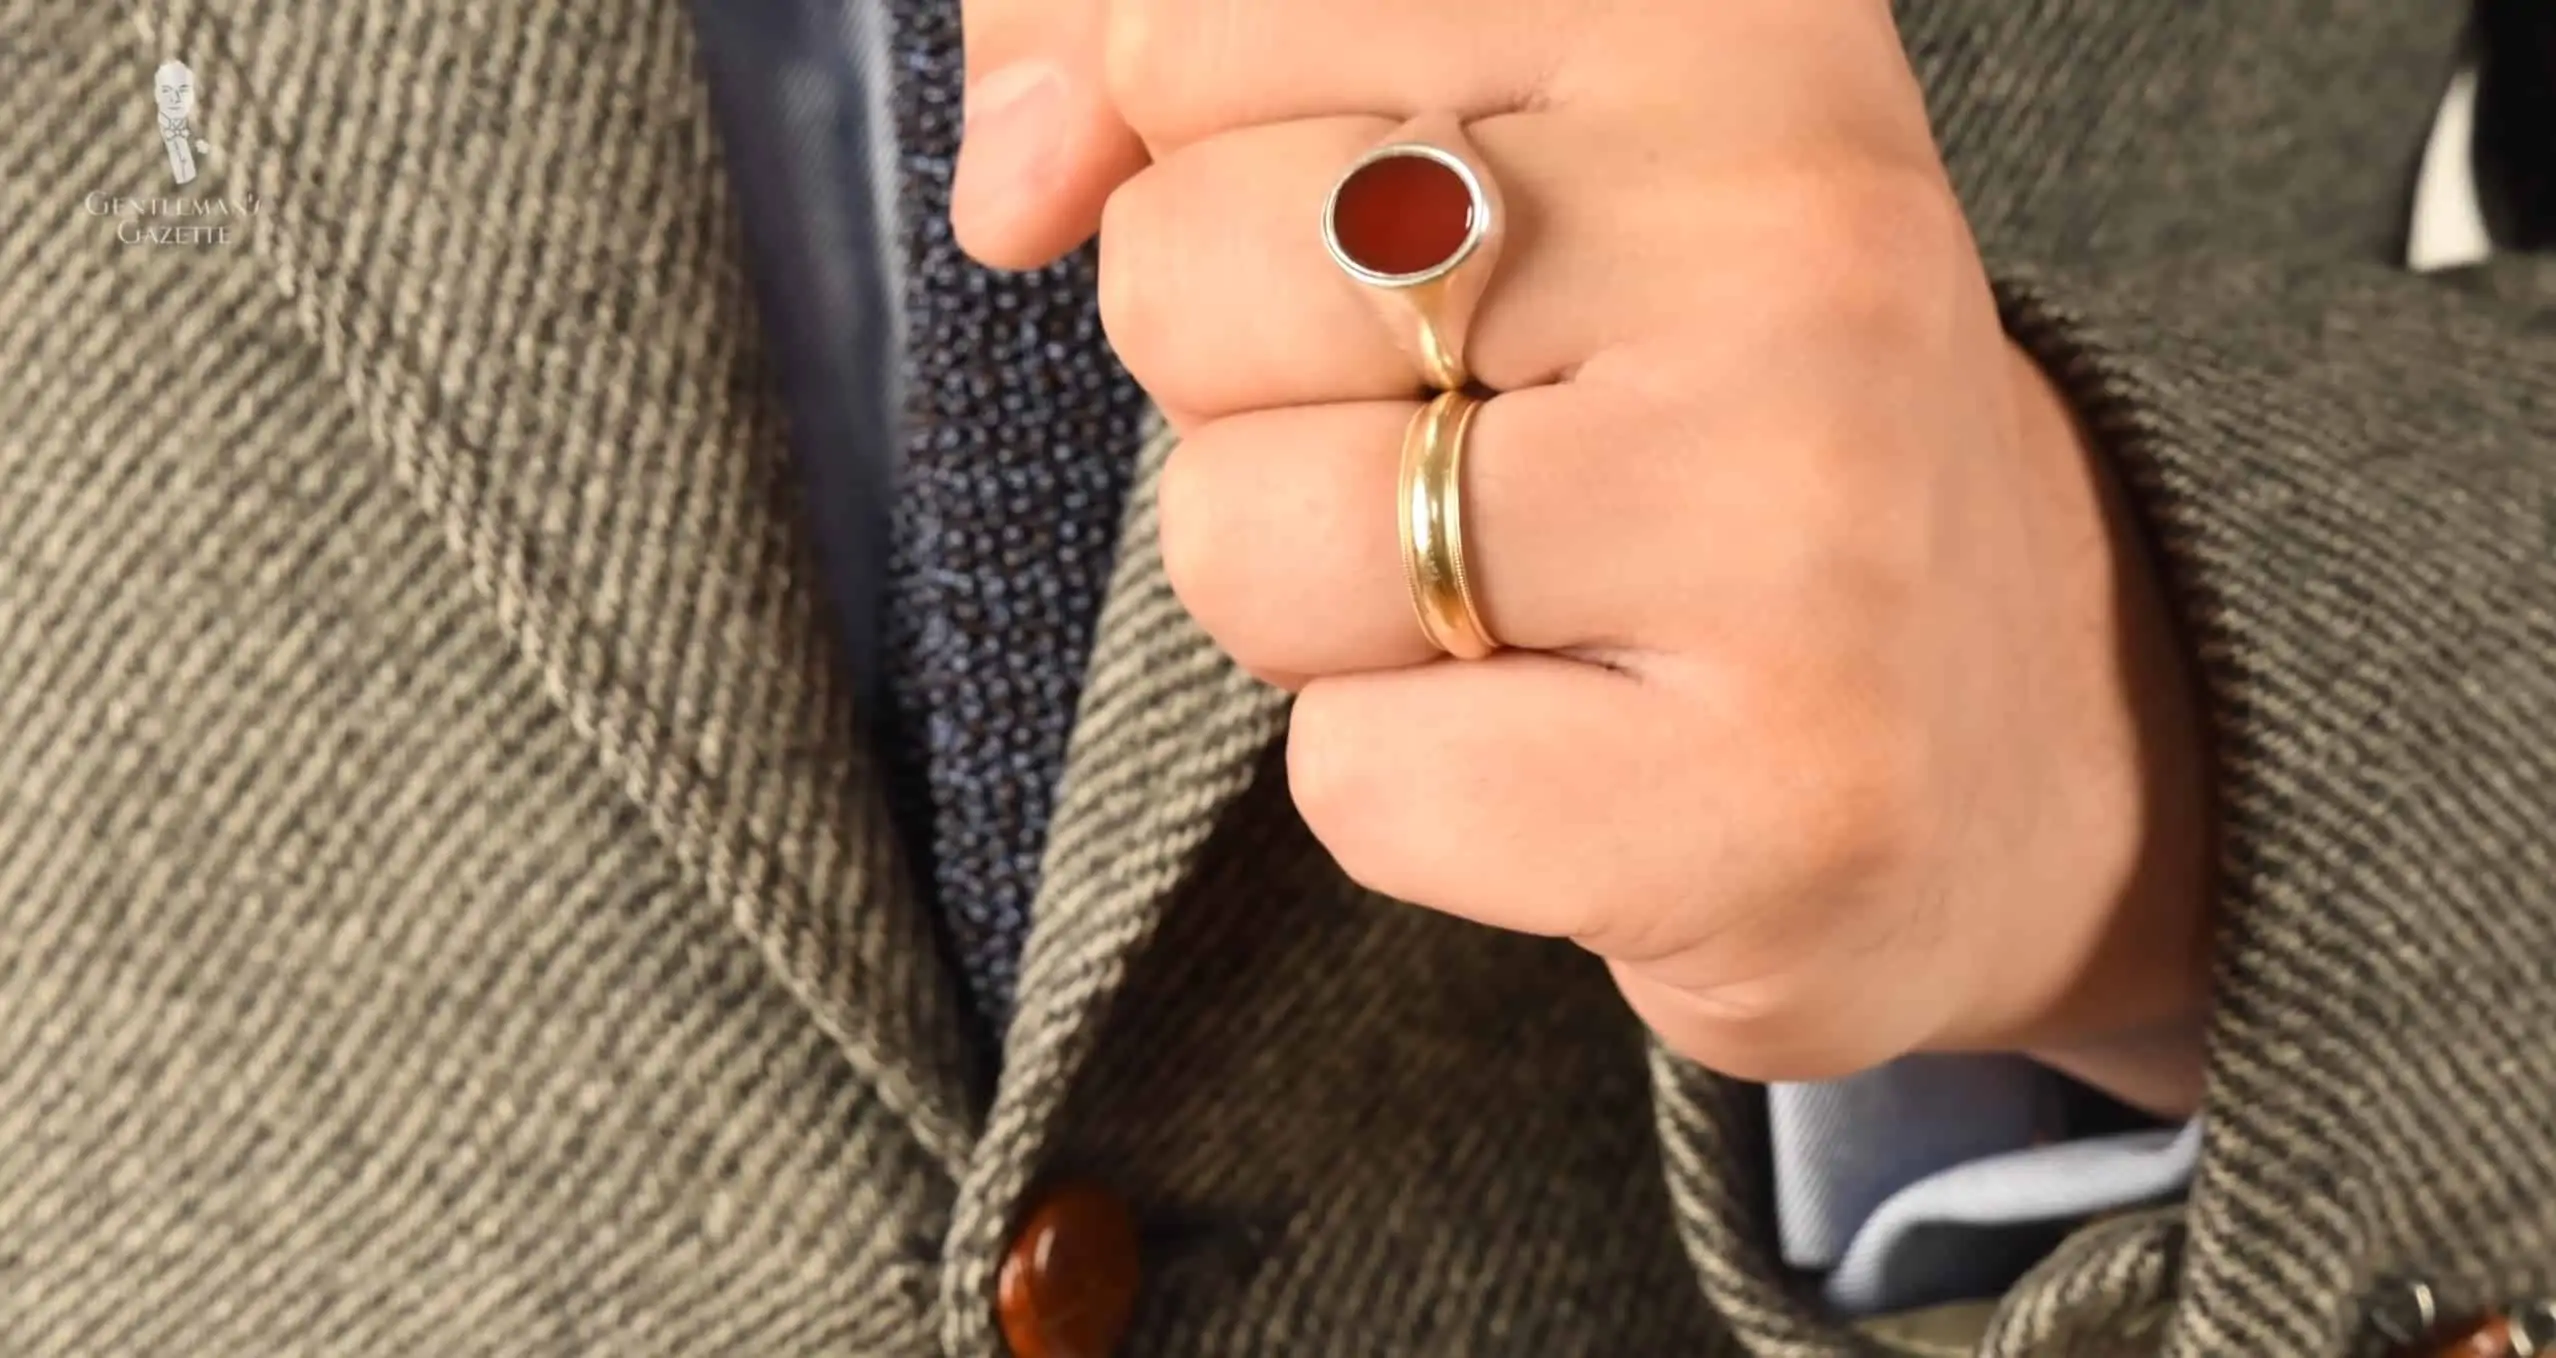 A hand wearing two rings, including a gold ring with a red stone on the middle finger